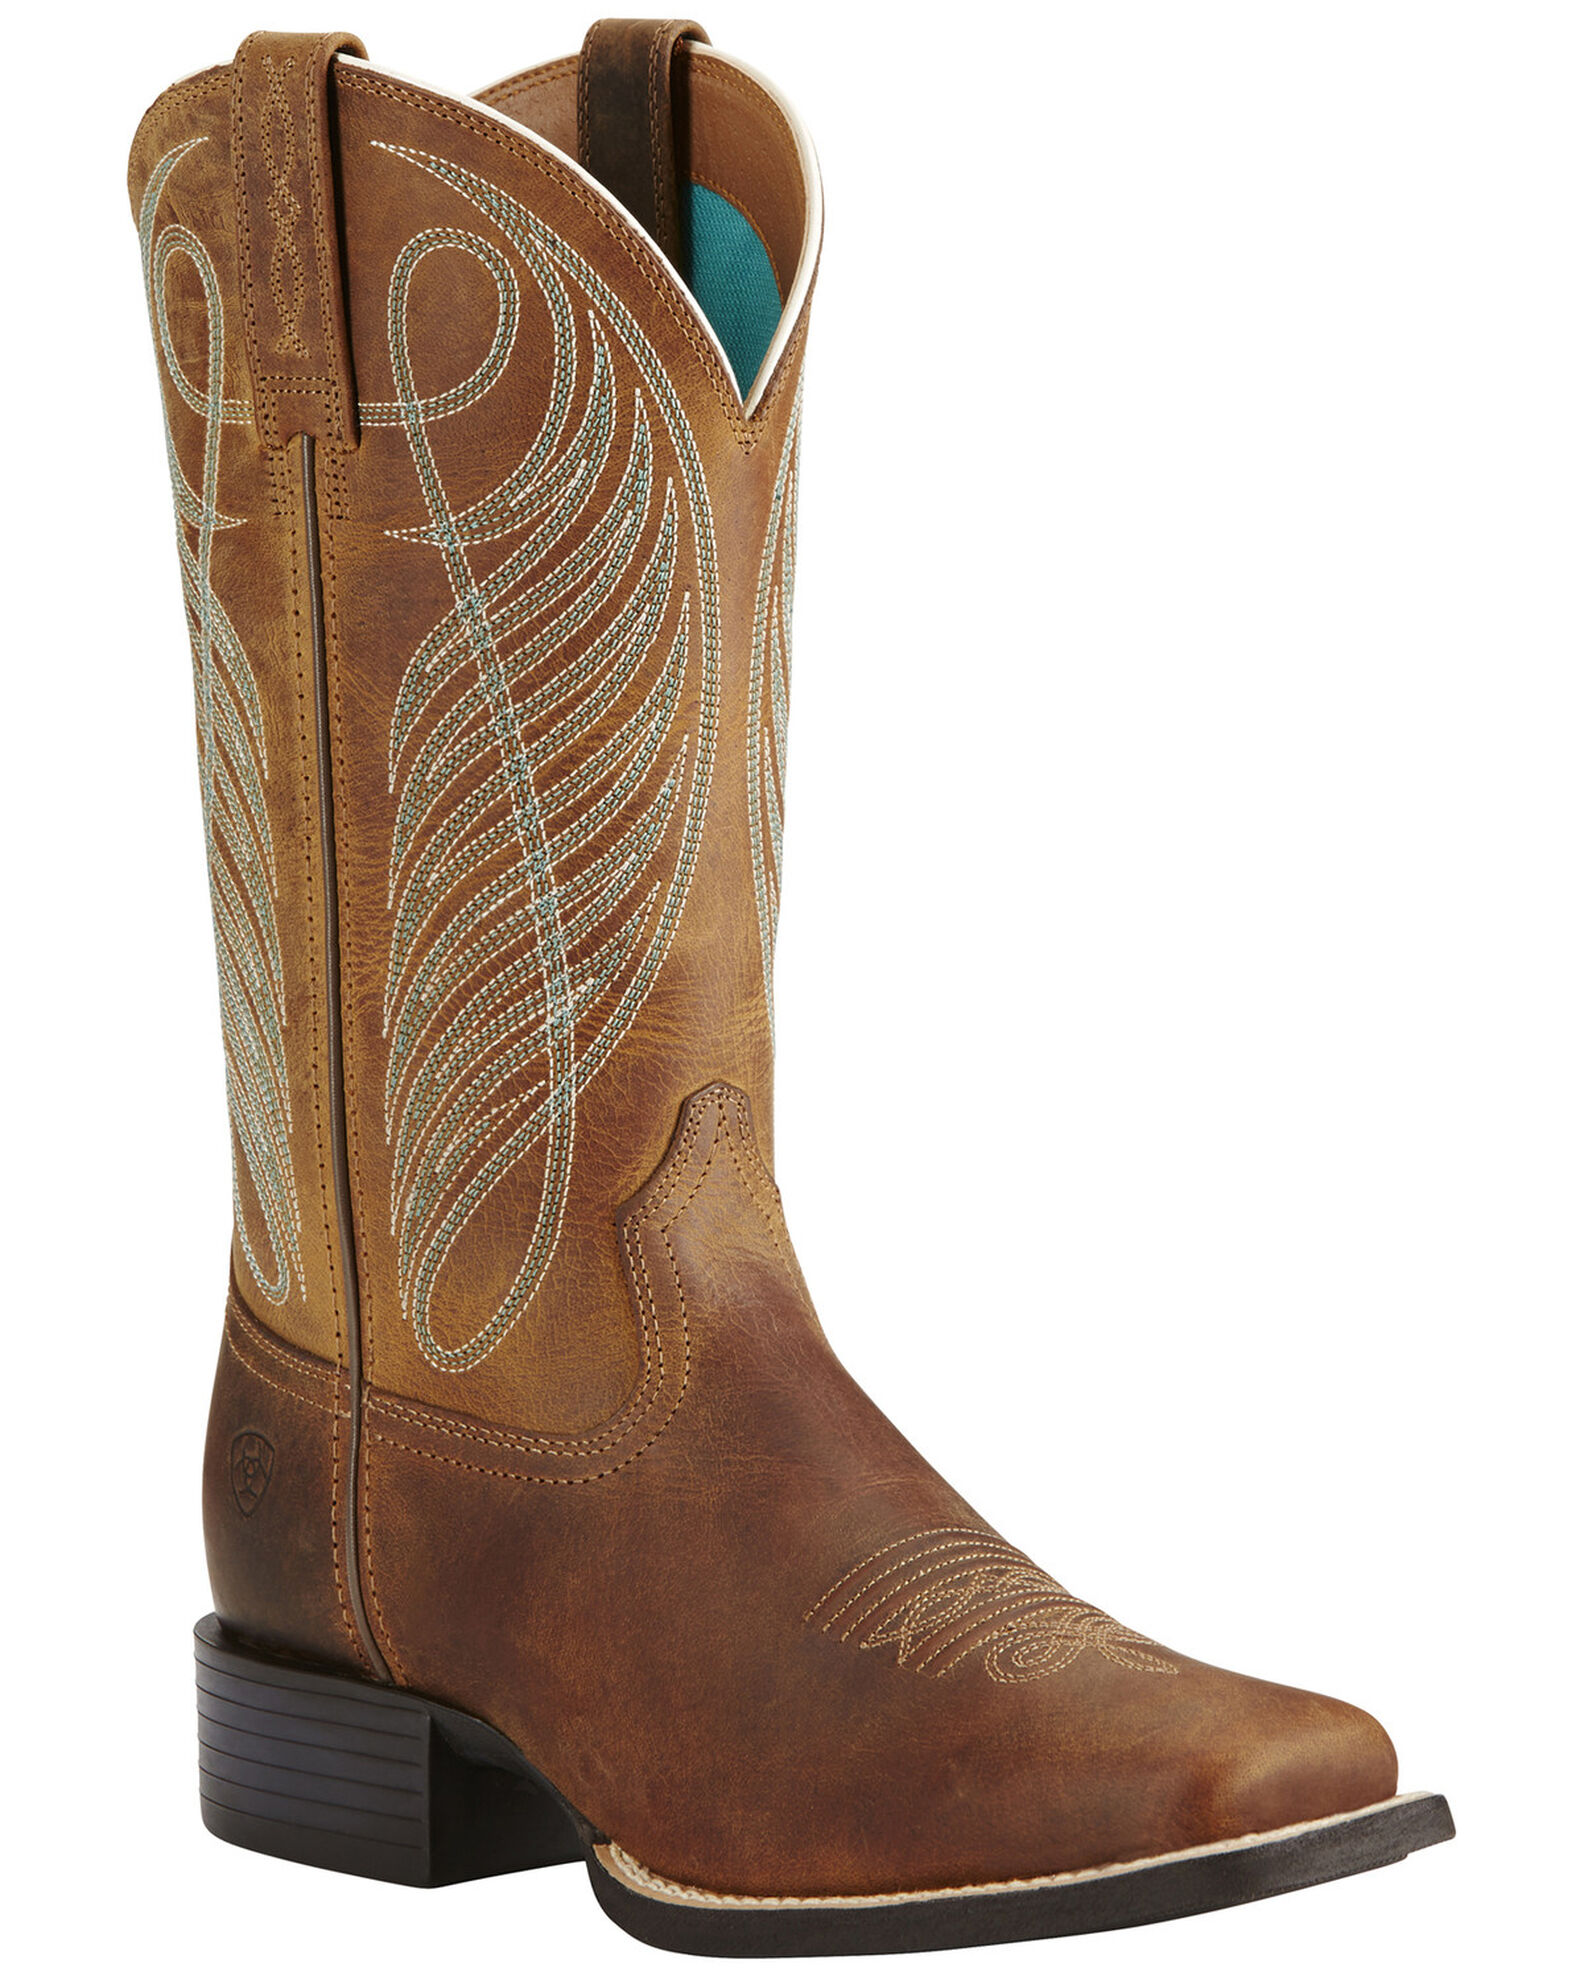 What Store Carries Ariat Women's Round Up Western Boots?